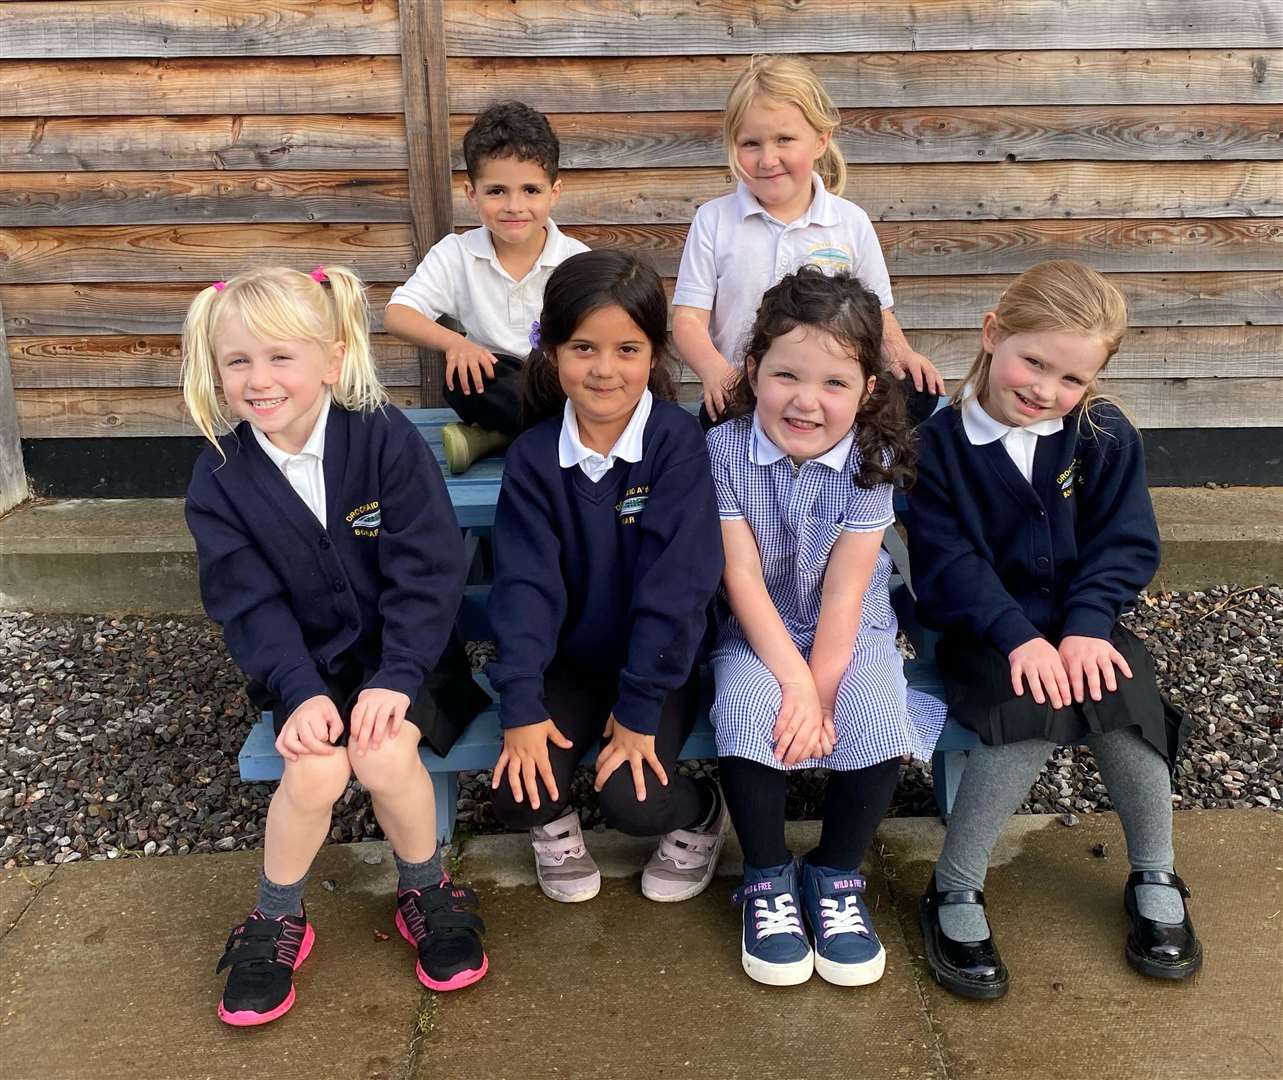 Pictured are: Back row: Torben Manners-Debusscherre and Ottilie Williams. Front row: Peggy Murray, Olivia Lopes-Carrie, Ruby Ross and Mireya Lane. Also in P1 is Kora McGregor-Robertson, who was not present for the photo.